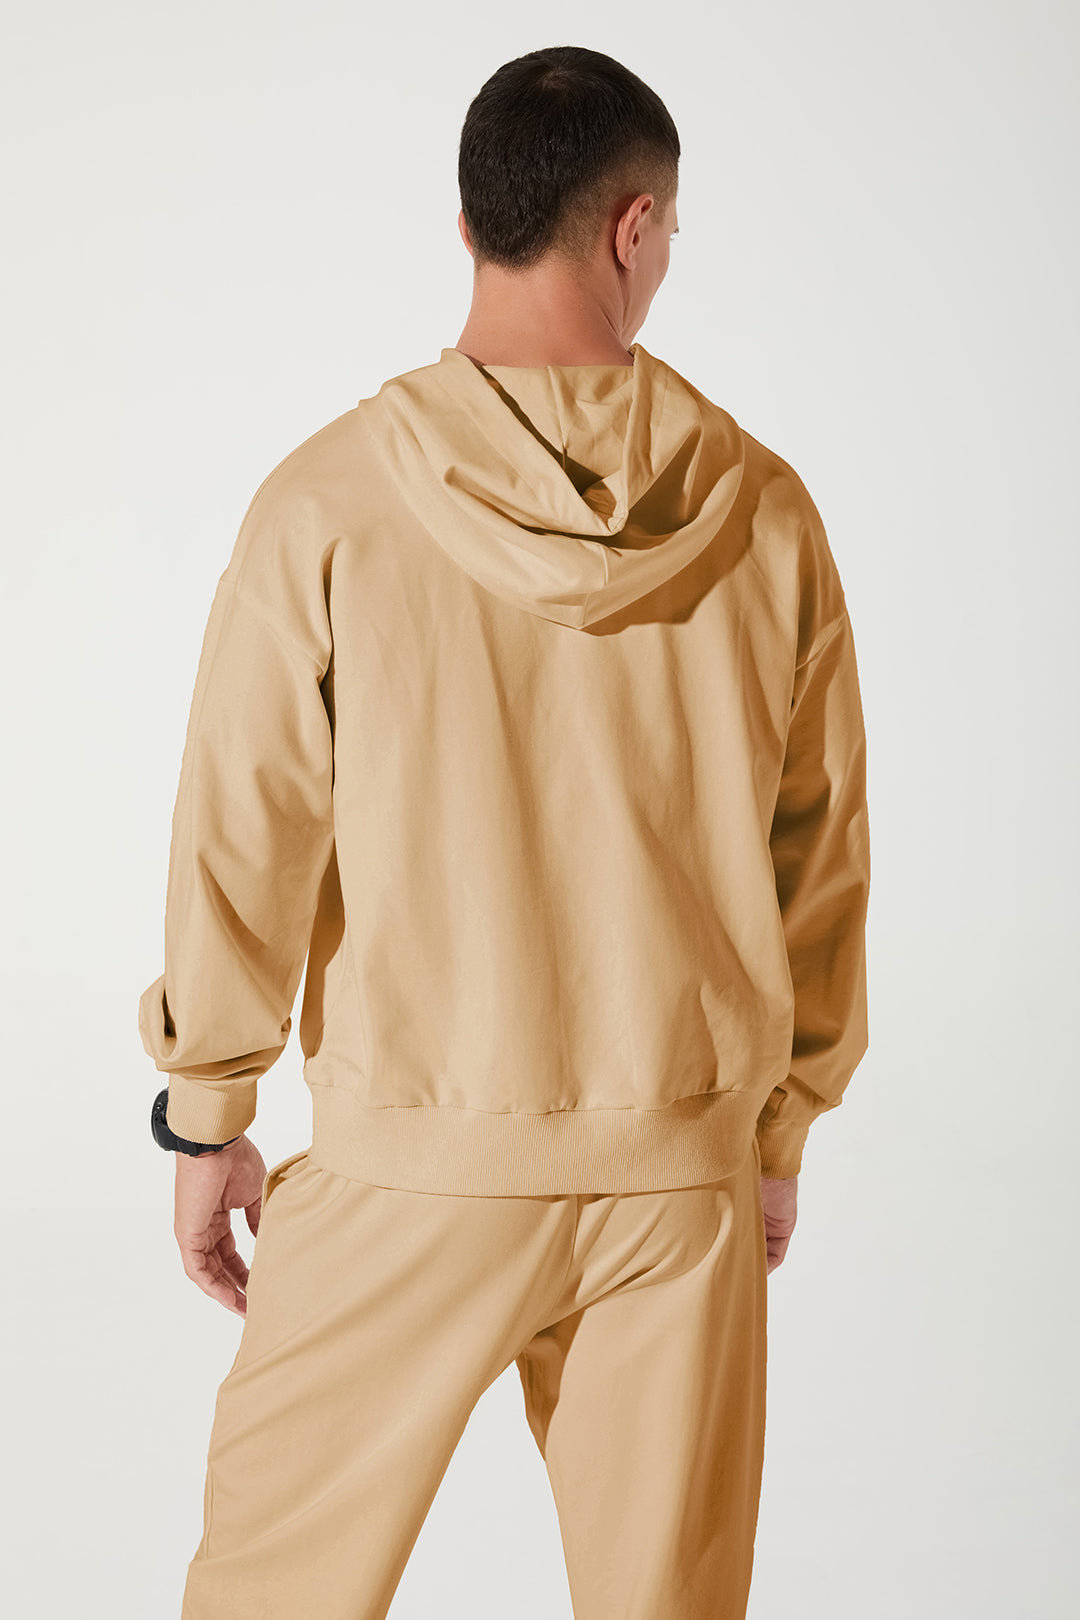 Stylish men's cappuccino beige hoodie with a cropped design - OW-0033-MHO-BG_5.